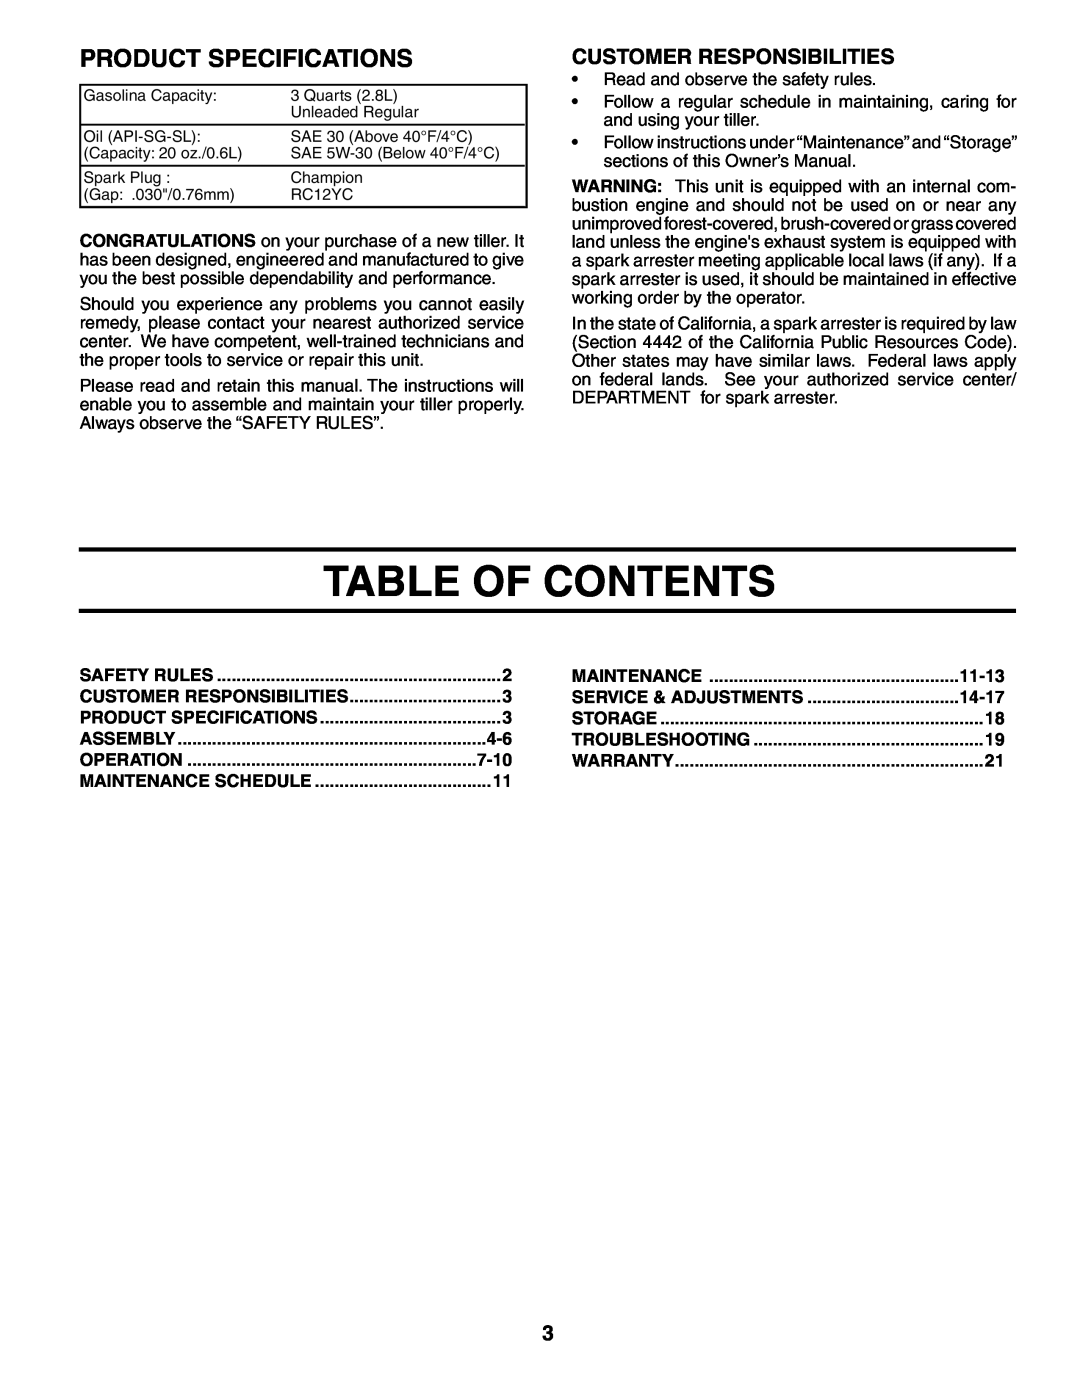 Poulan PRRT65 manual Table Of Contents, Product Specifications, Customer Responsibilities 